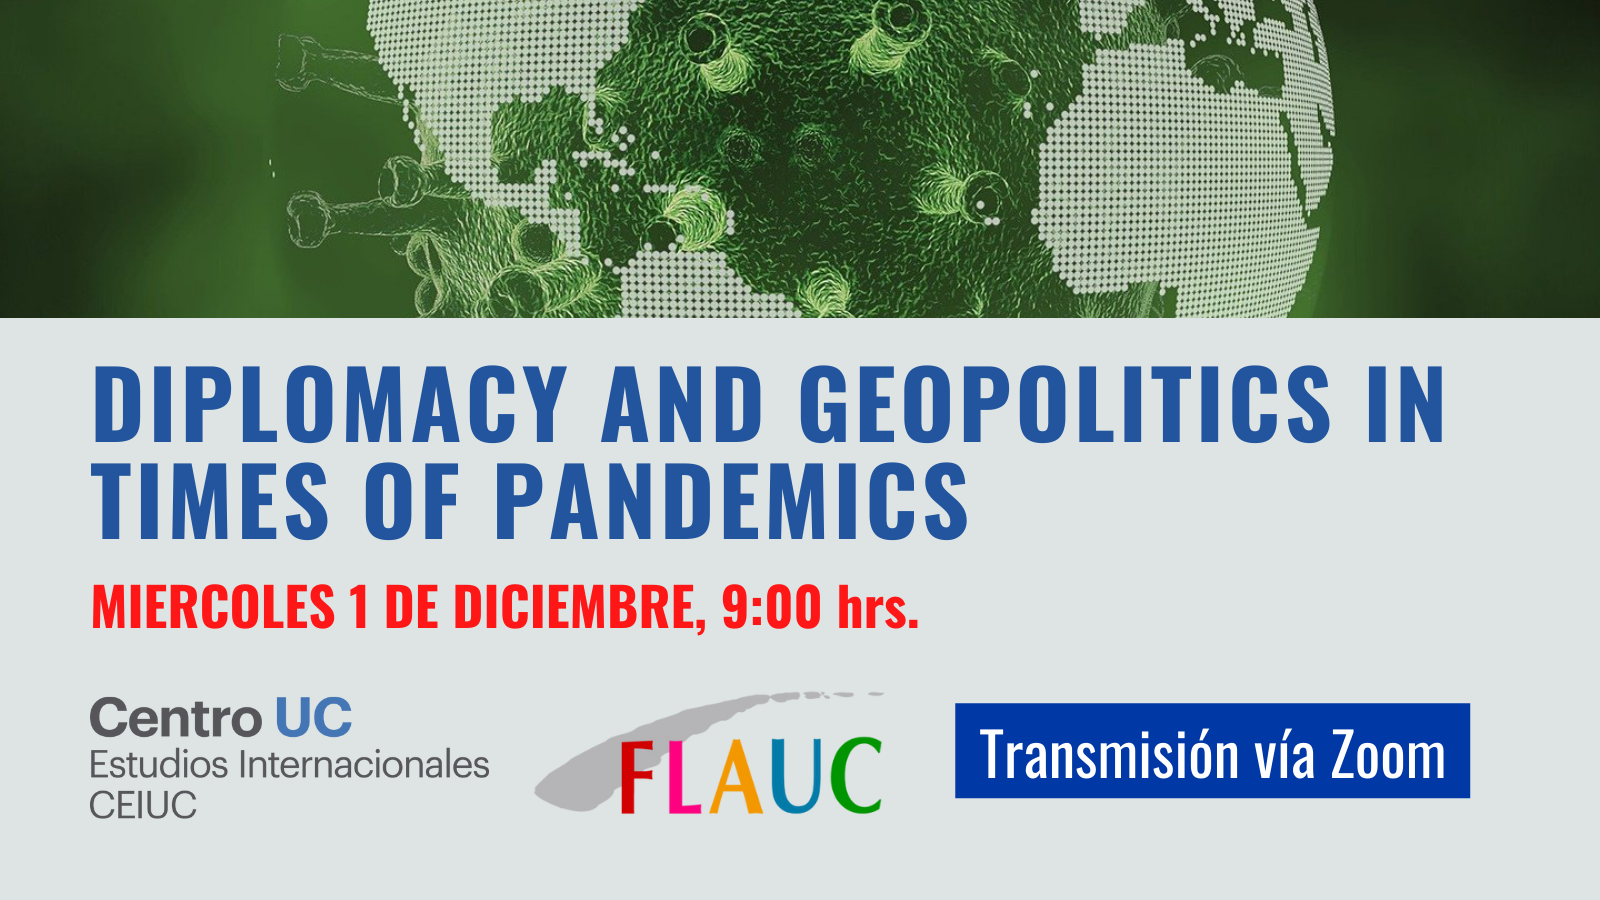 Diplomacy and geopolitics in times of pandemics